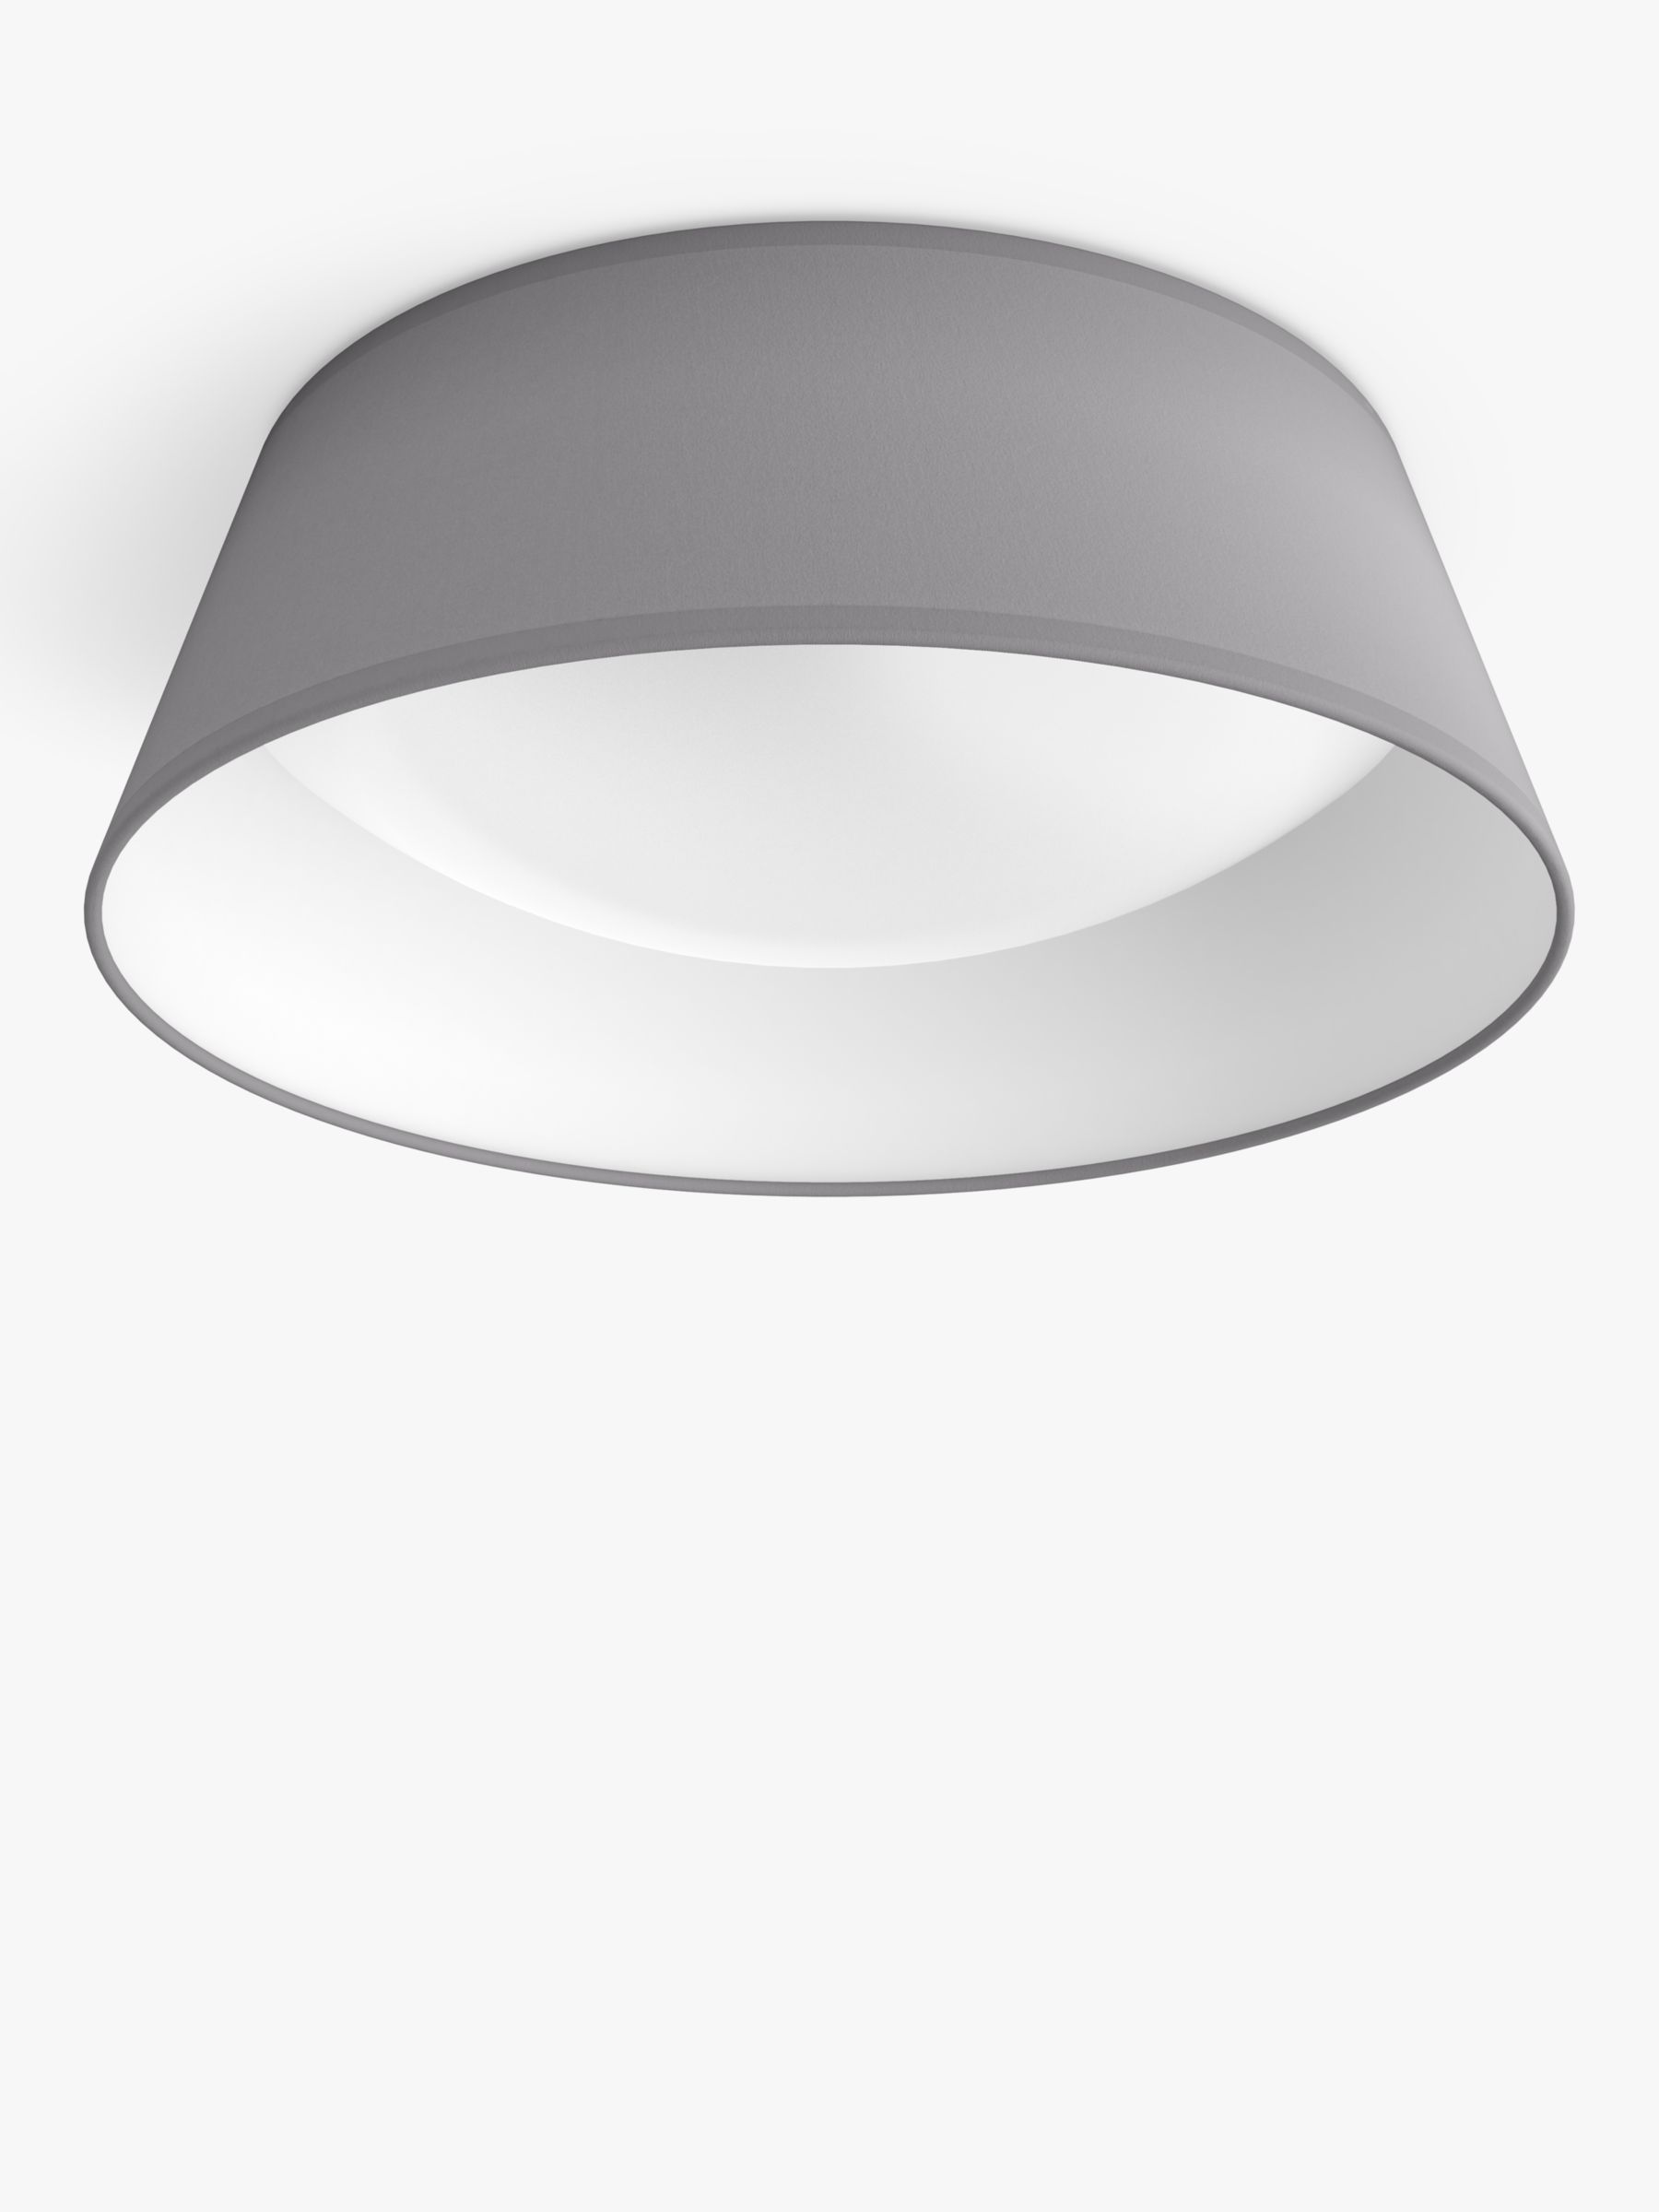 Photo of Philips dawn cl258 led ceiling light grey